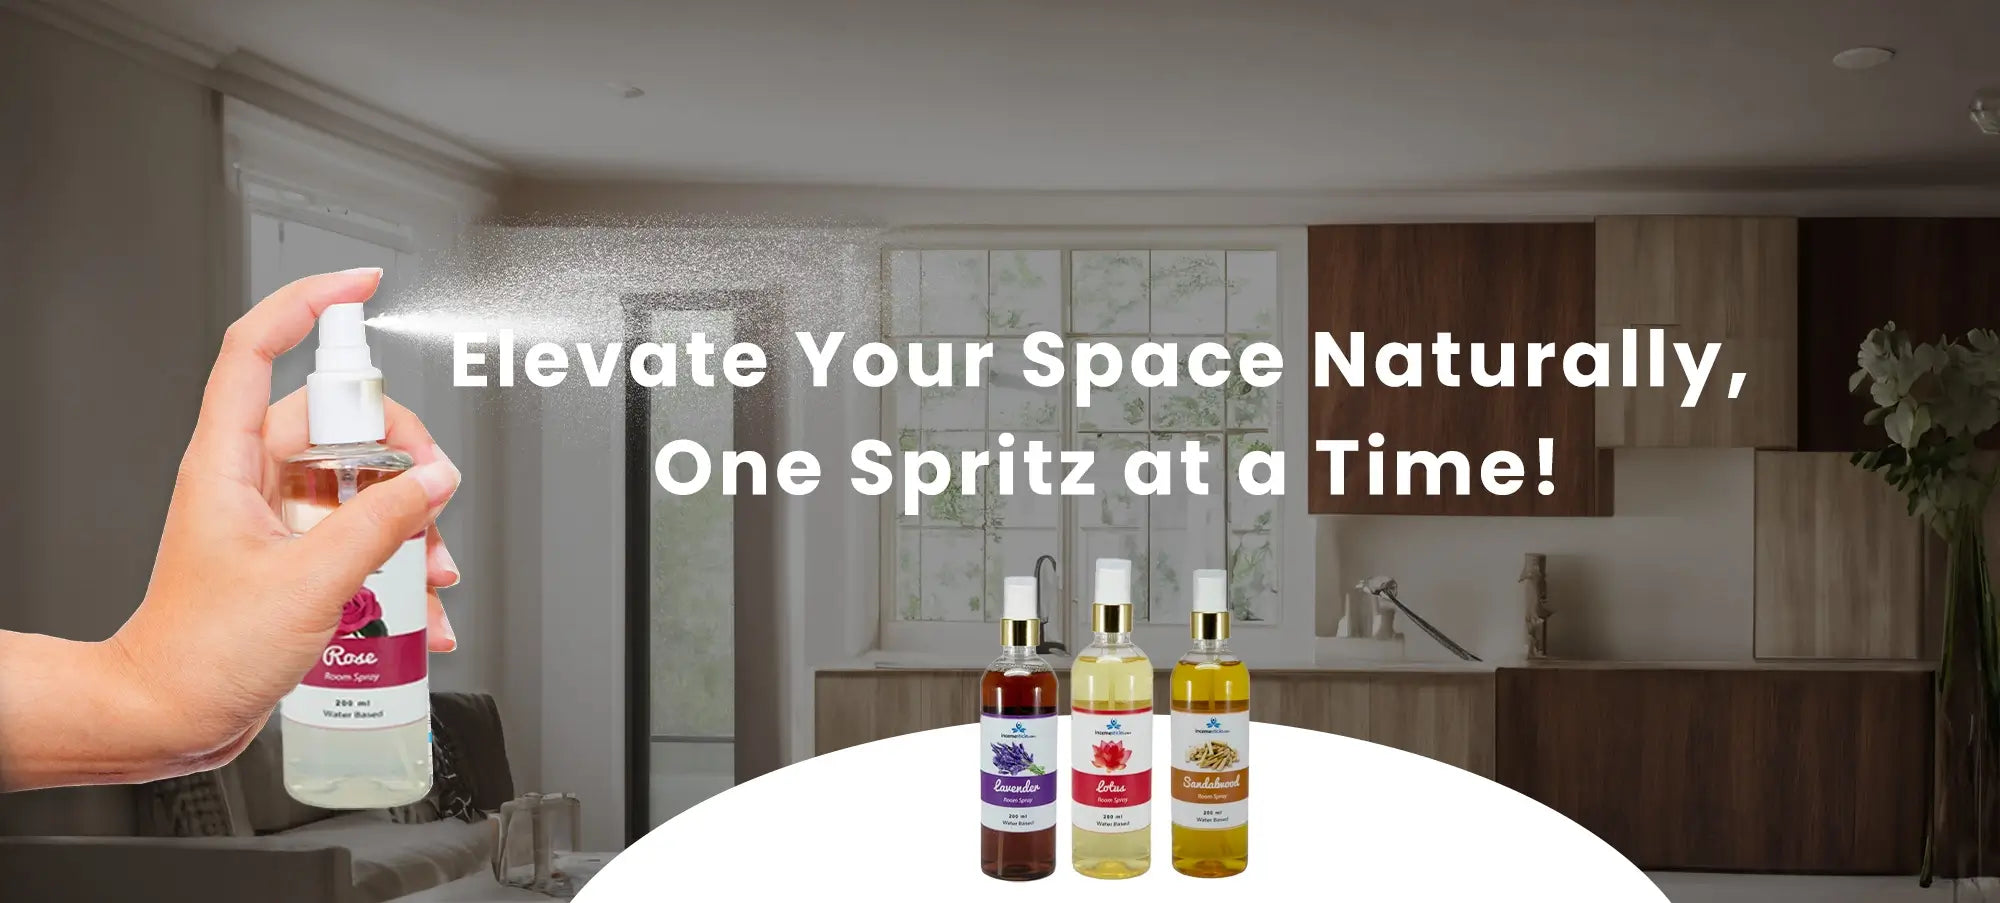 Natural Air Fresheners - A Symphony of Scents to Revitalize Your Space